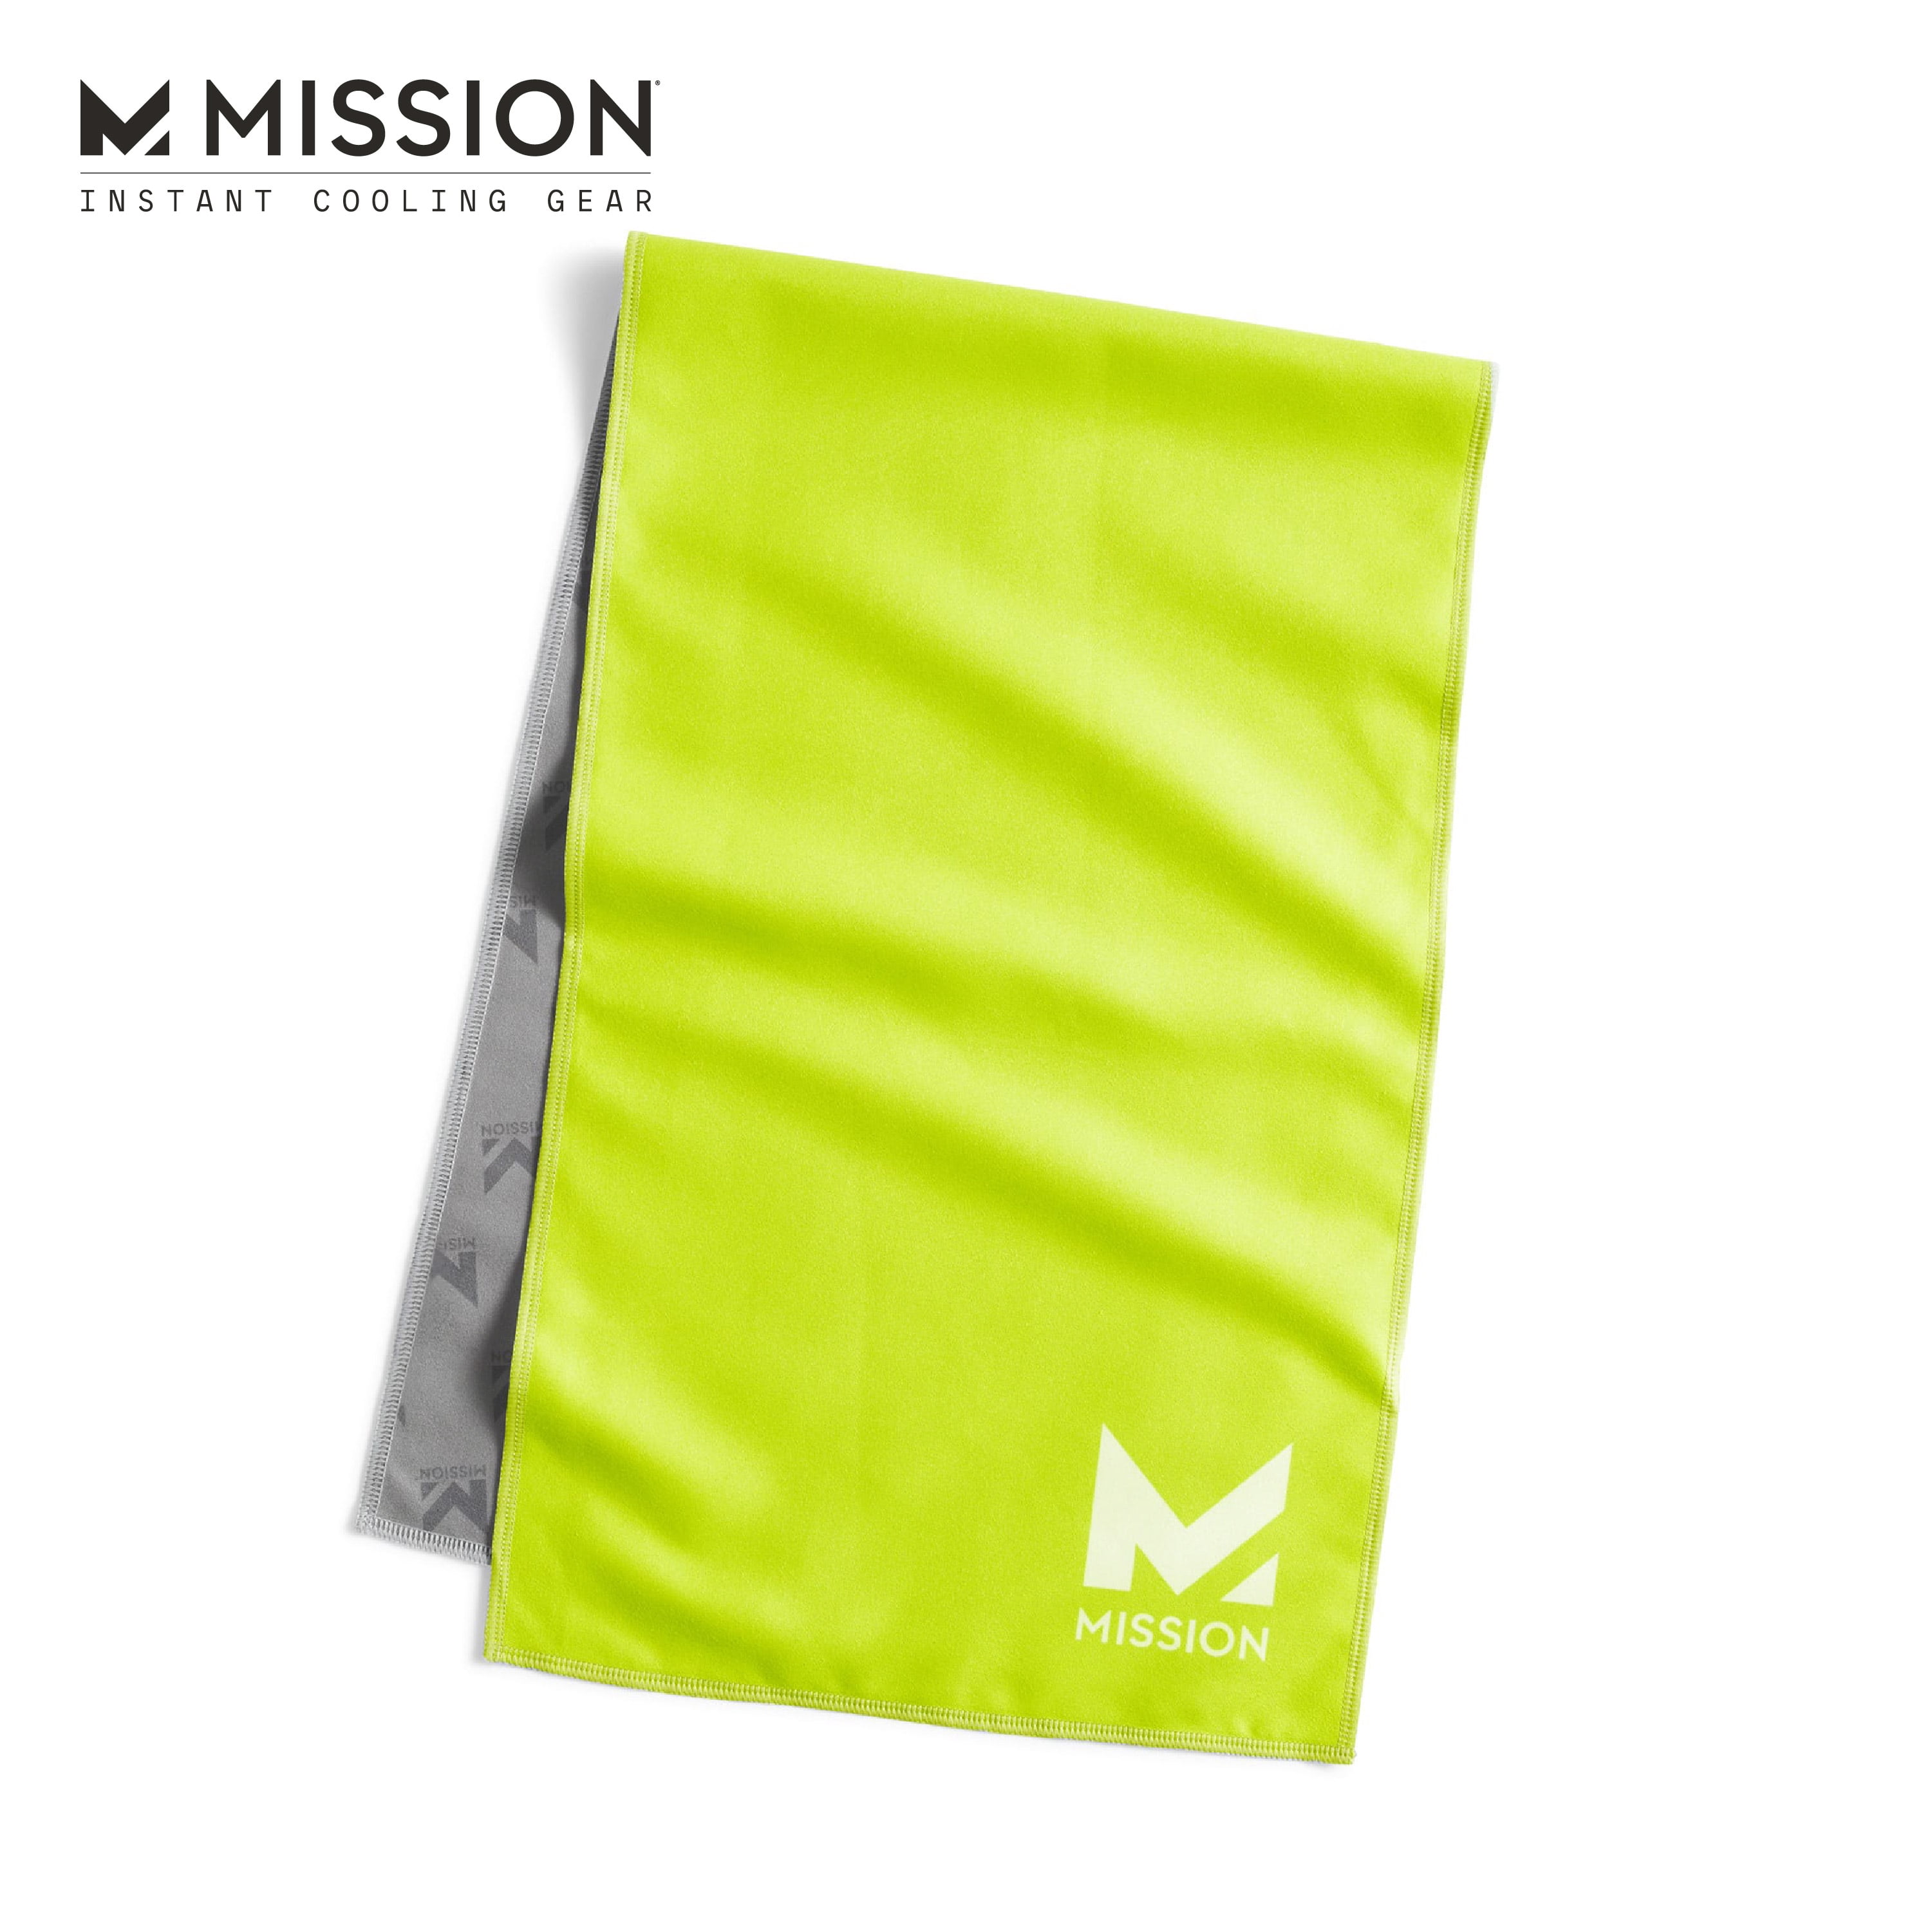 Size Brand New In Original Packaging 10” X 33” Mission Instant Cooling Towel